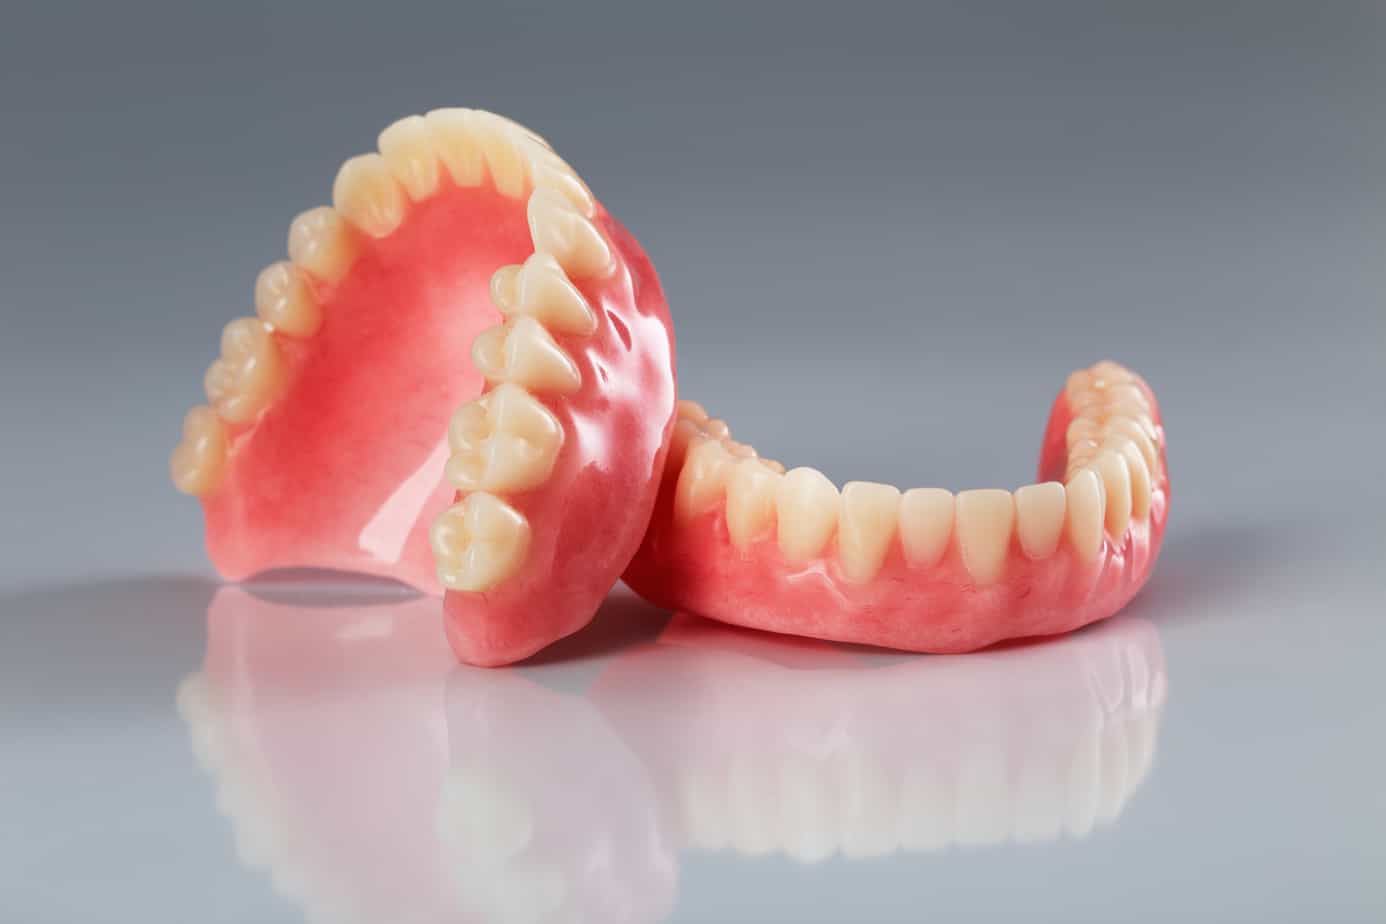 What is the Best Way to Take Care of My New Dentures?